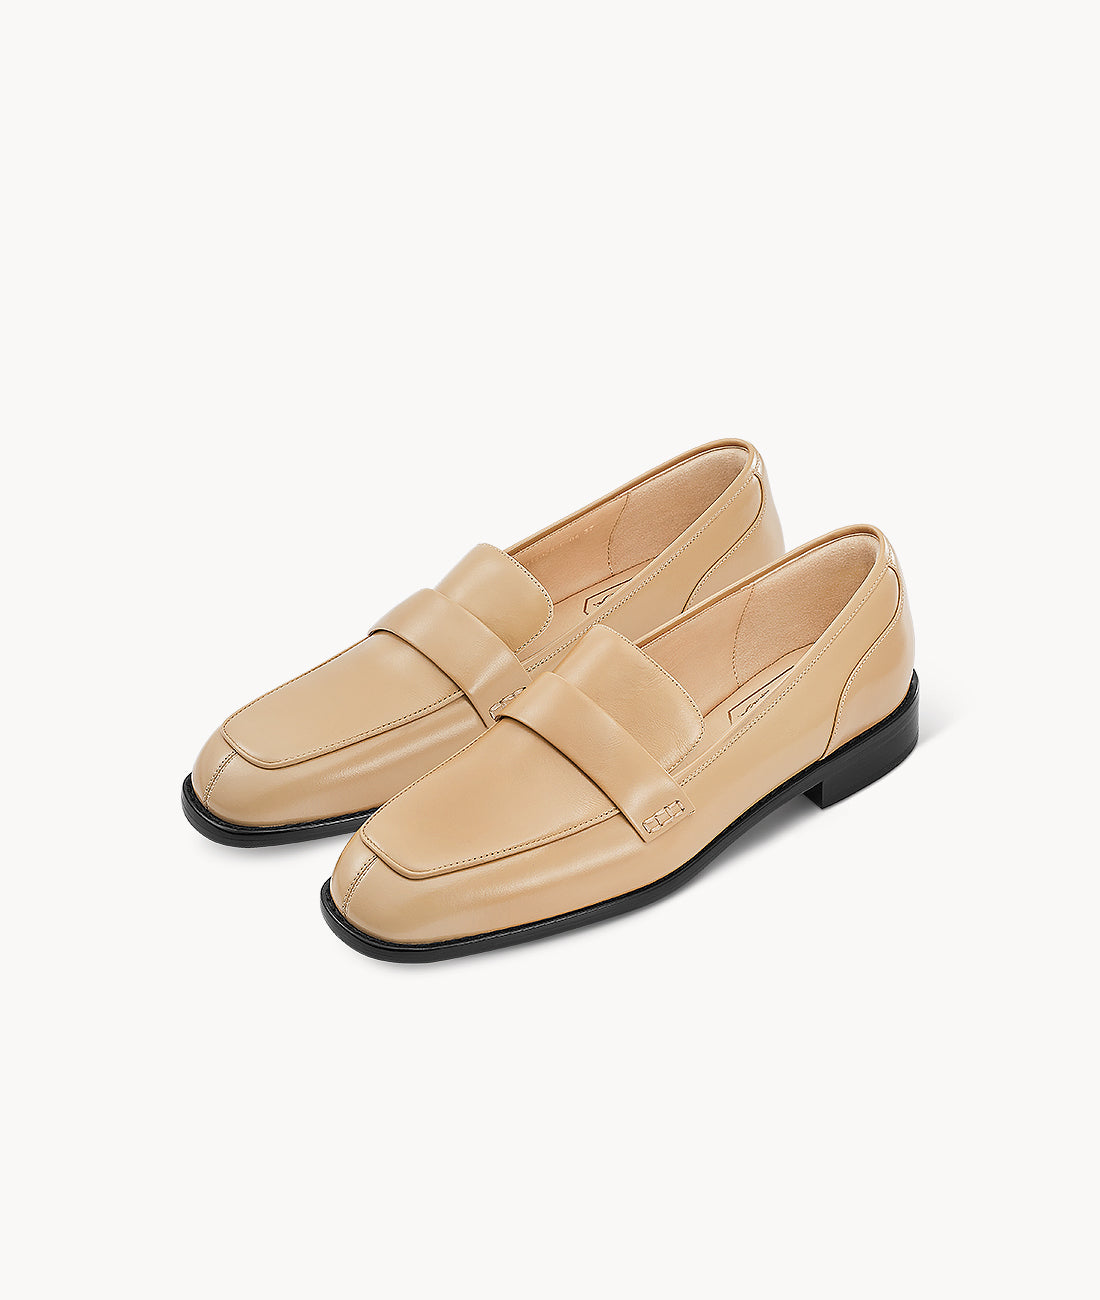 leather loafers women